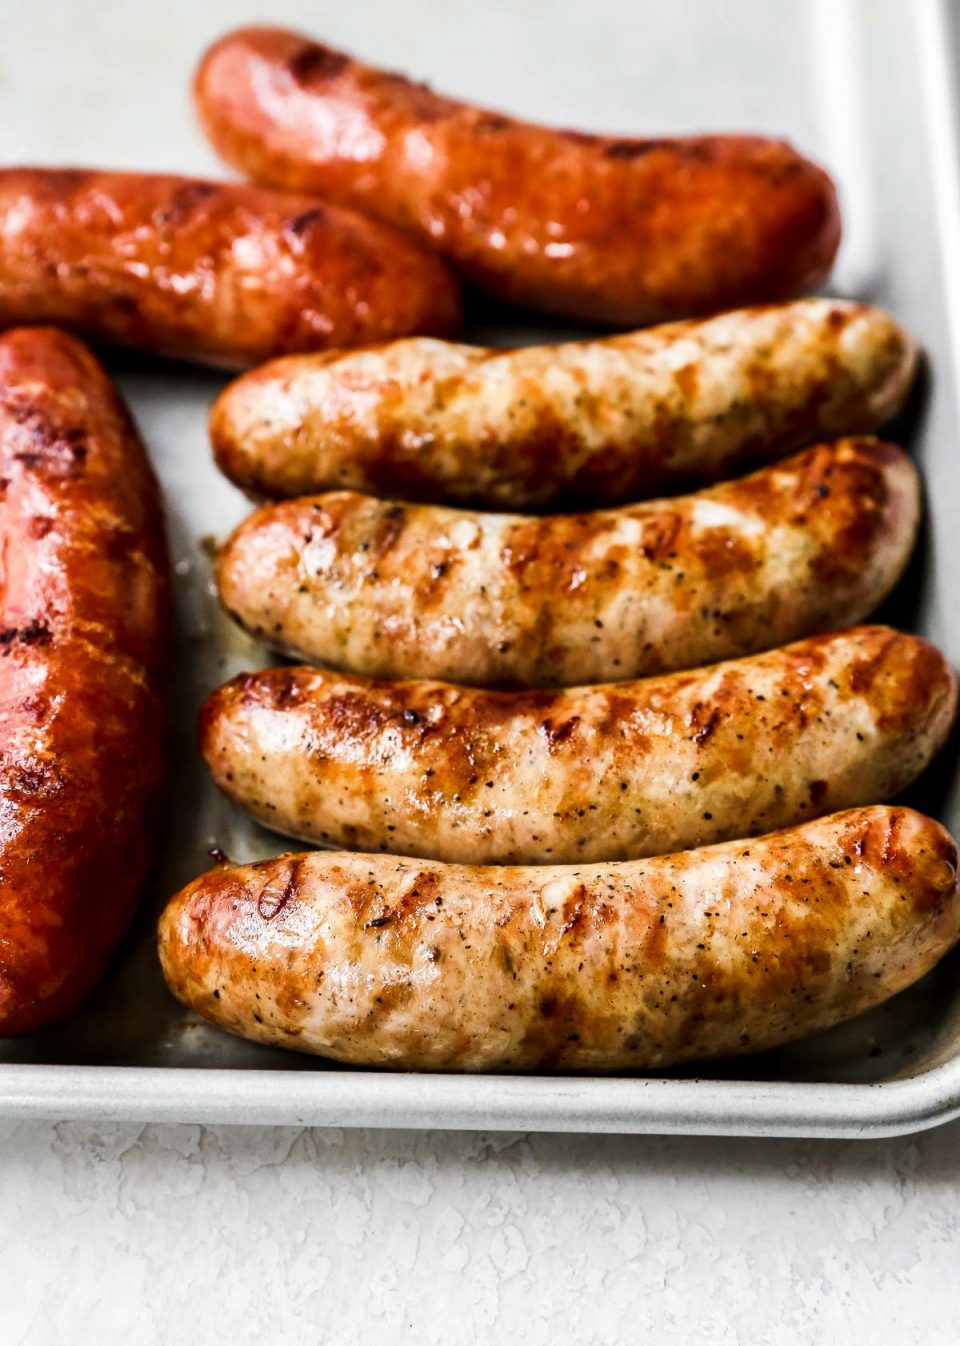 Grilled sausage links are arranged atop a parchment lined baking sheet.